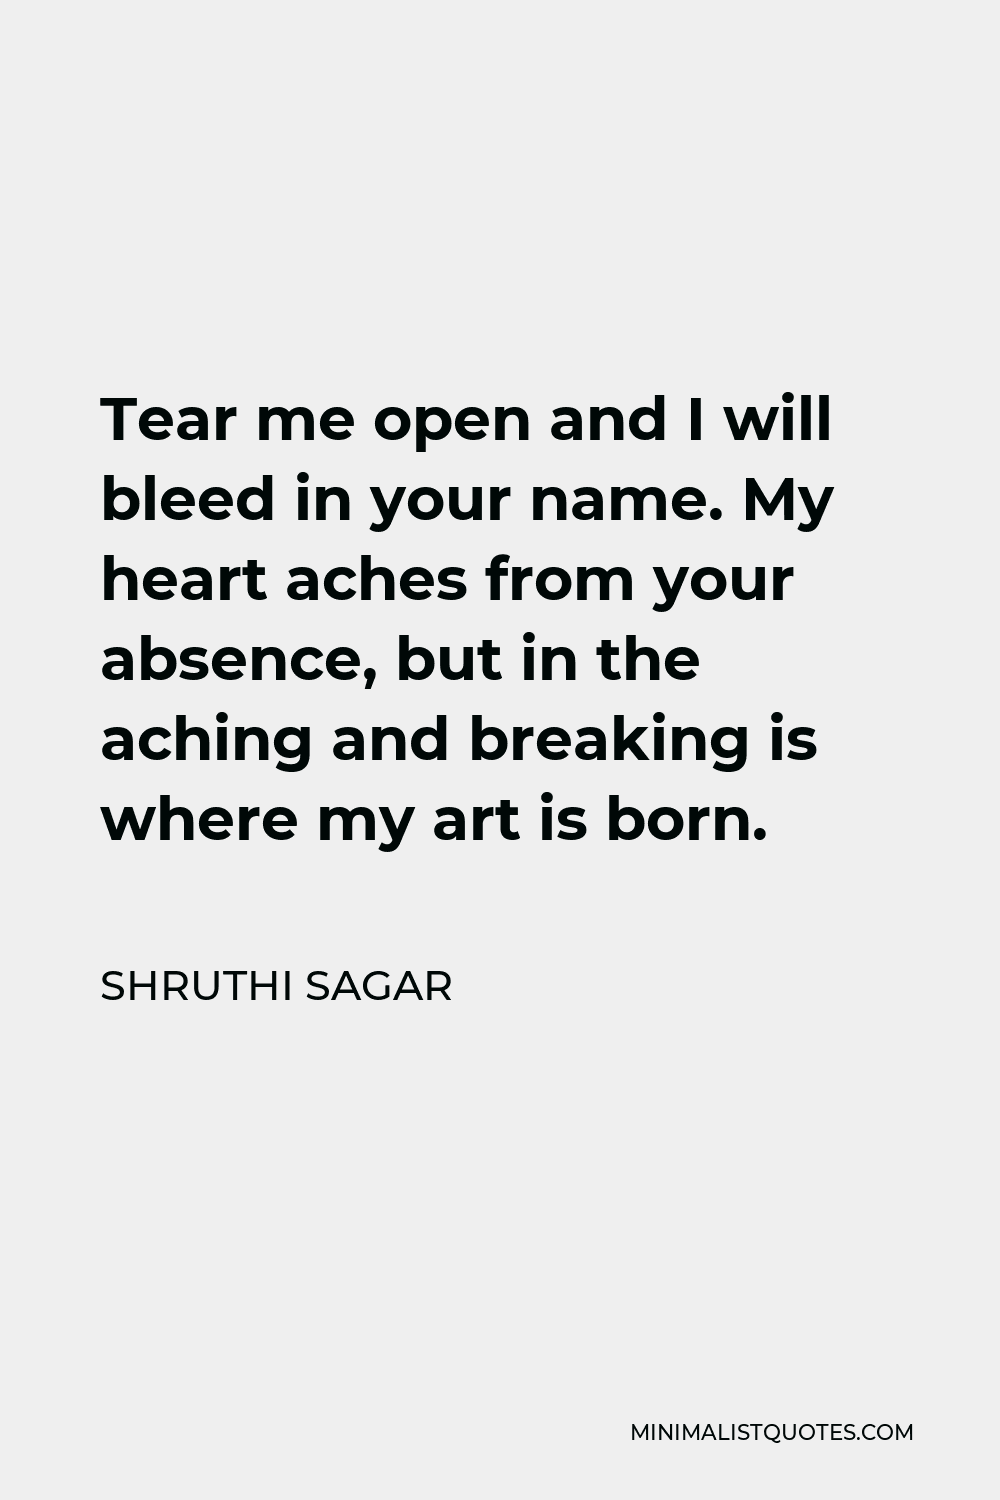 Shruthi Sagar Quote - Tear me open and I will bleed in your name. My heart aches from your absence, but in the aching and breaking is where my art is born.